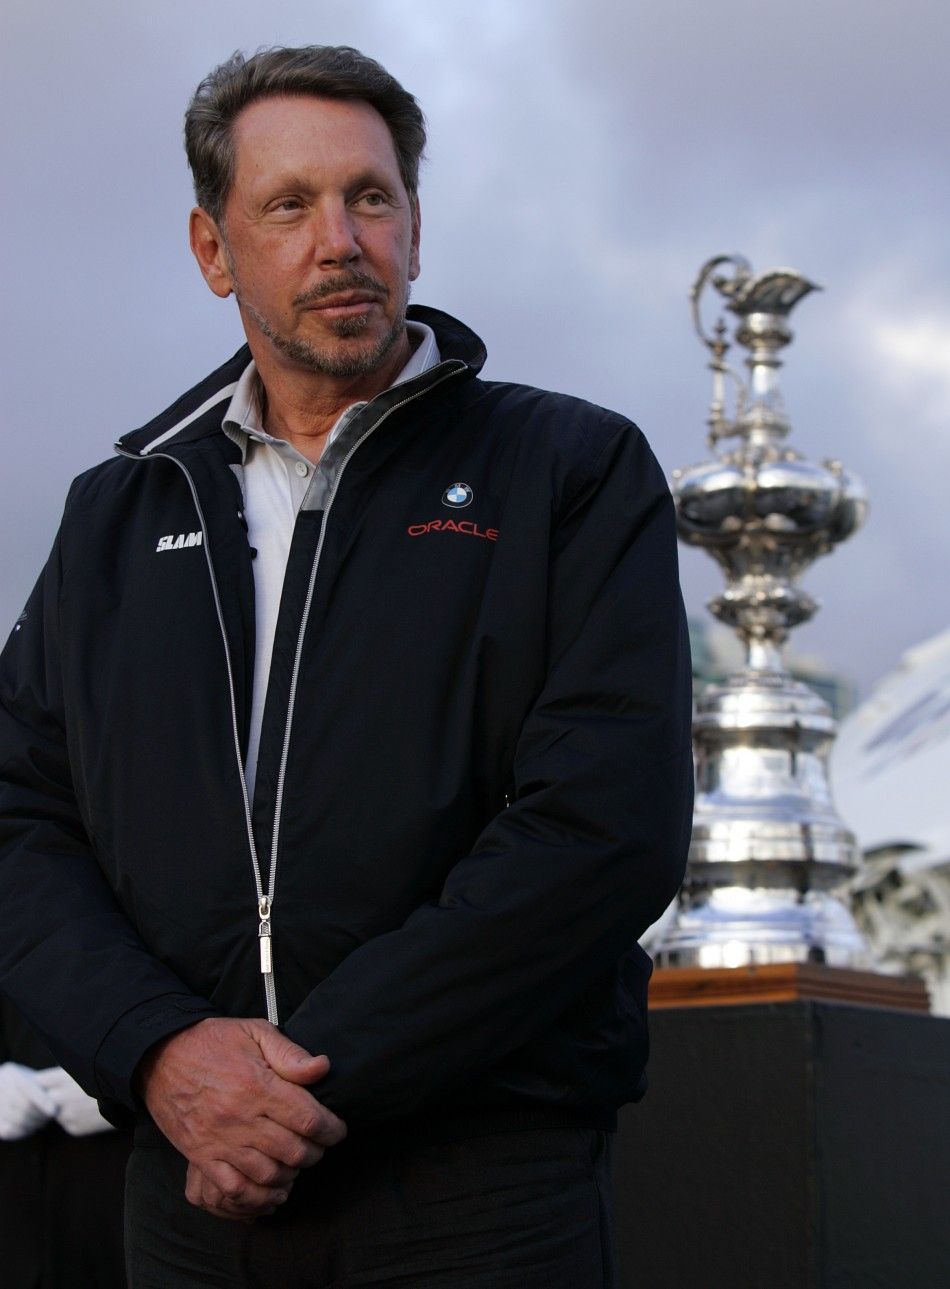 Larry Ellison, owner of BMW Oracle, winner of the 33rd Americas Cup, stands next to the Americas Cup on the USS Midway in San Diego, California February 21, 2010.